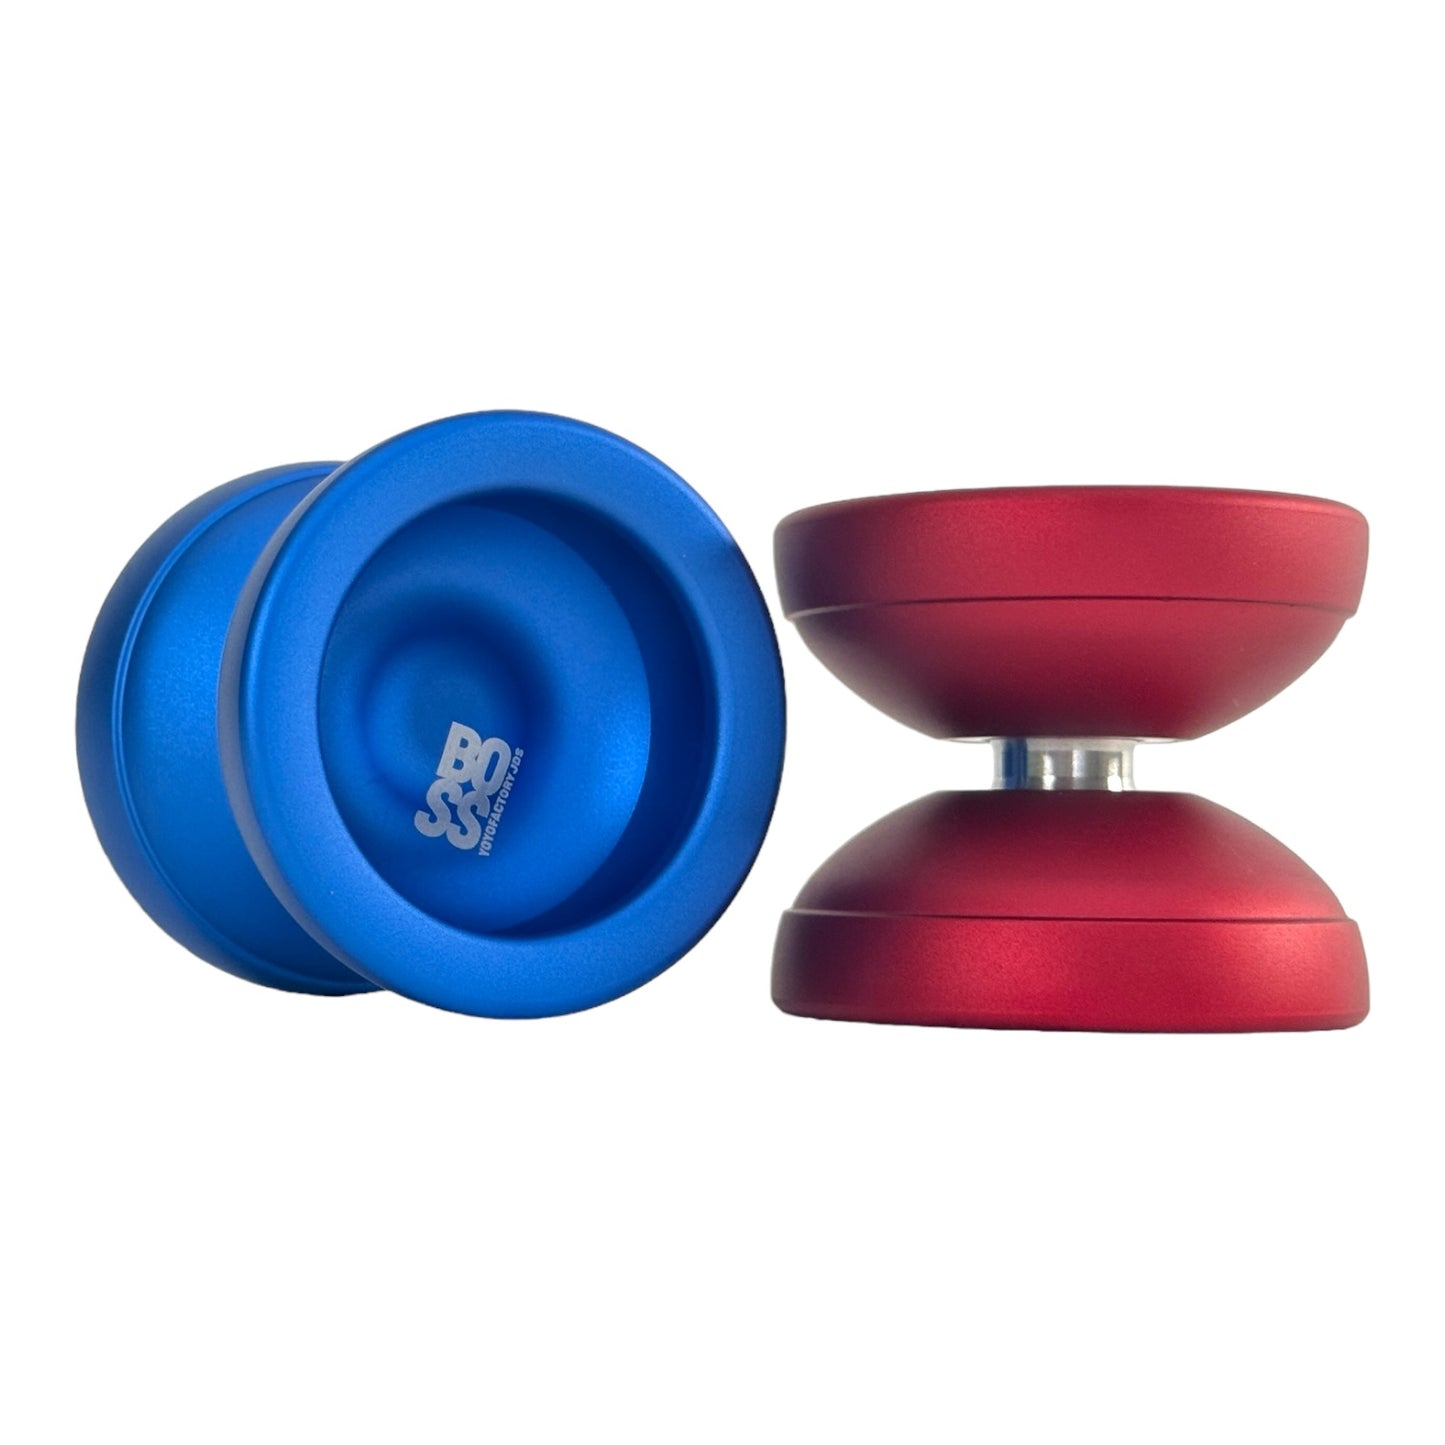 JDS BOSS YOYOS BLUE AND RED